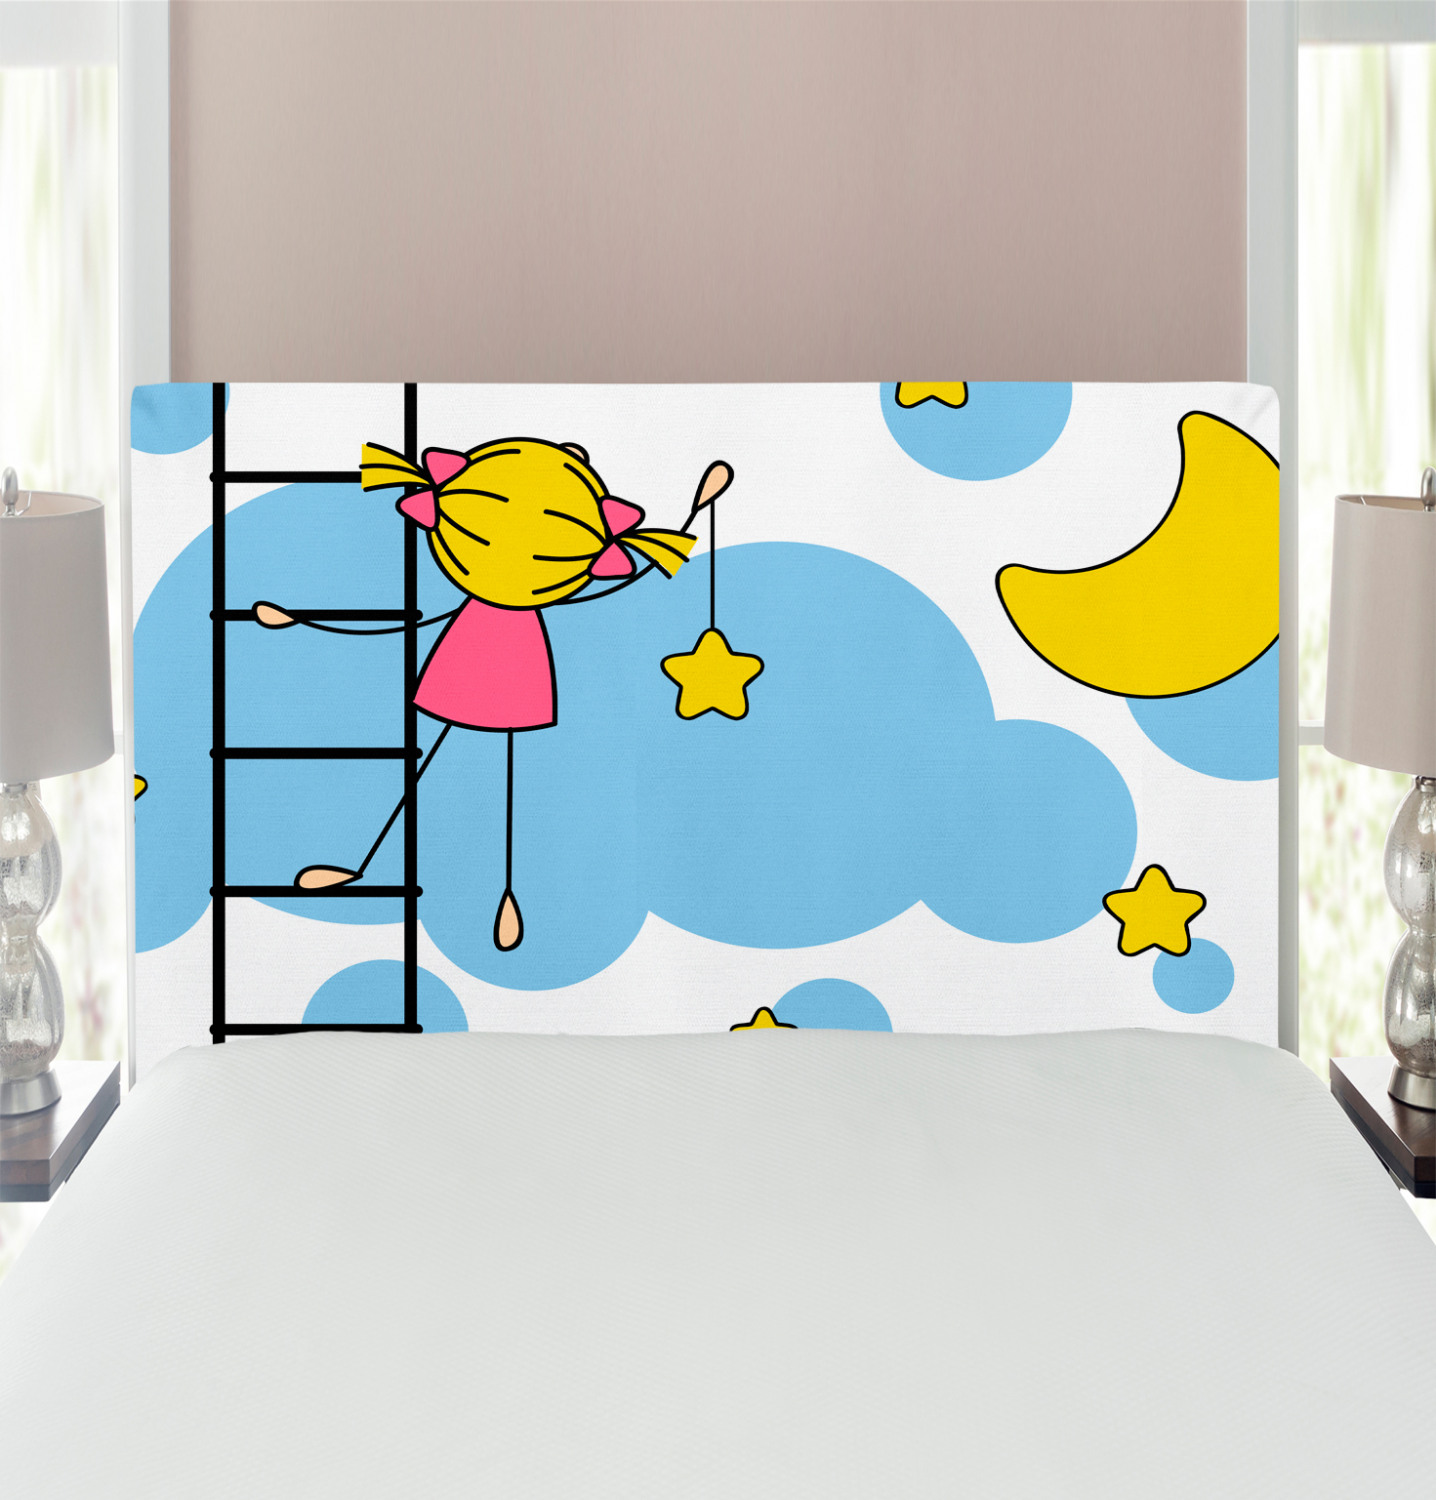 Star Headboard, Girl on Ladder Hanging a Star in the Night Sky with Half Moon Cartoon Picture, Upholstered Decorative Metal Bed Headboard with Memory Foam, Twin Size, Yellow Blue, by Ambesonne - image 1 of 4